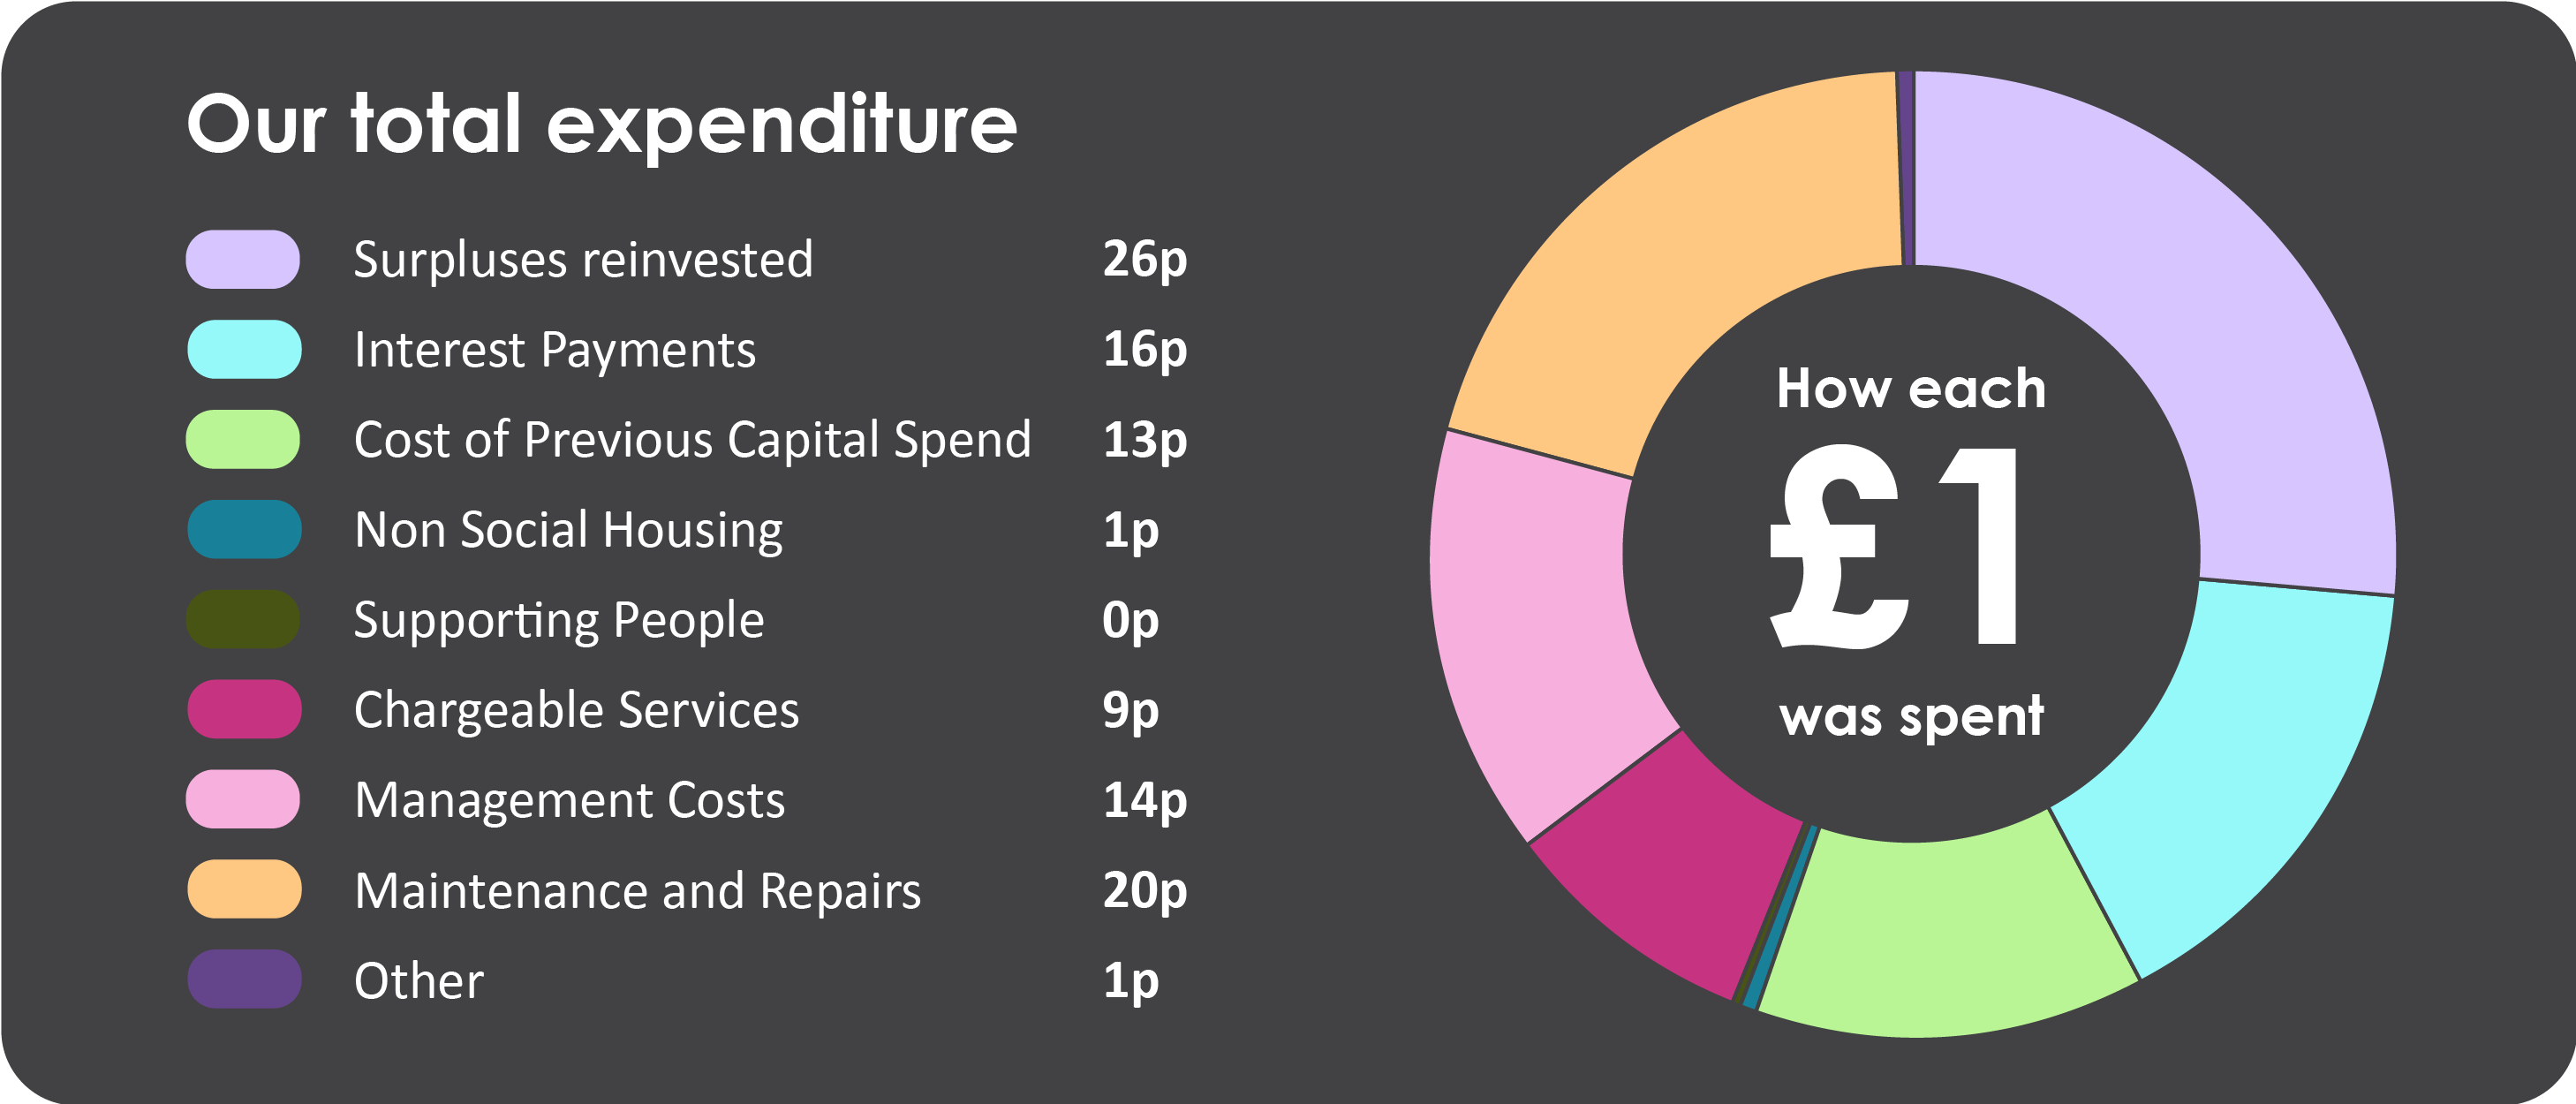 Our total expenditure